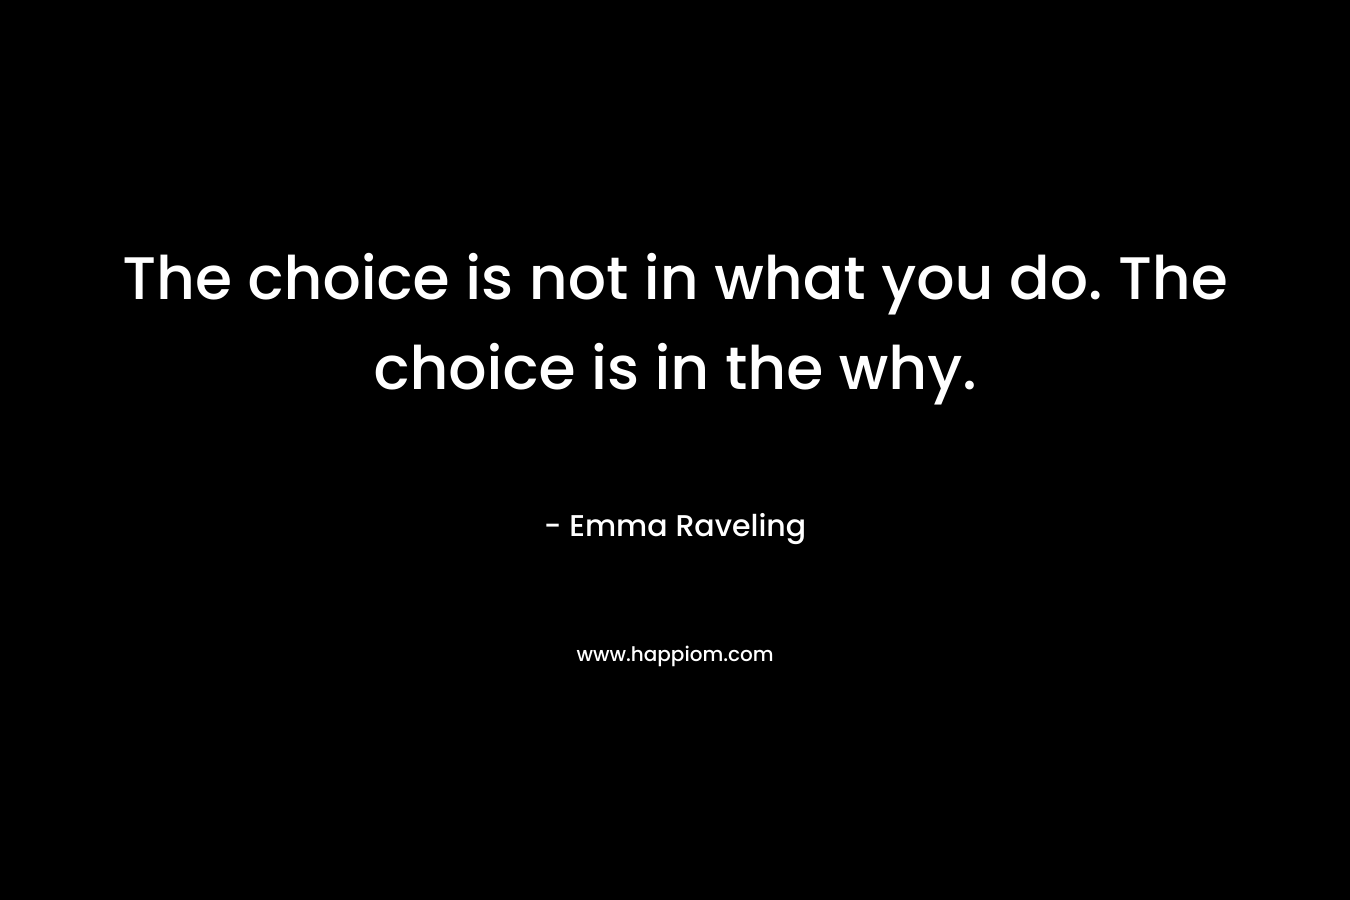 The choice is not in what you do. The choice is in the why. – Emma Raveling